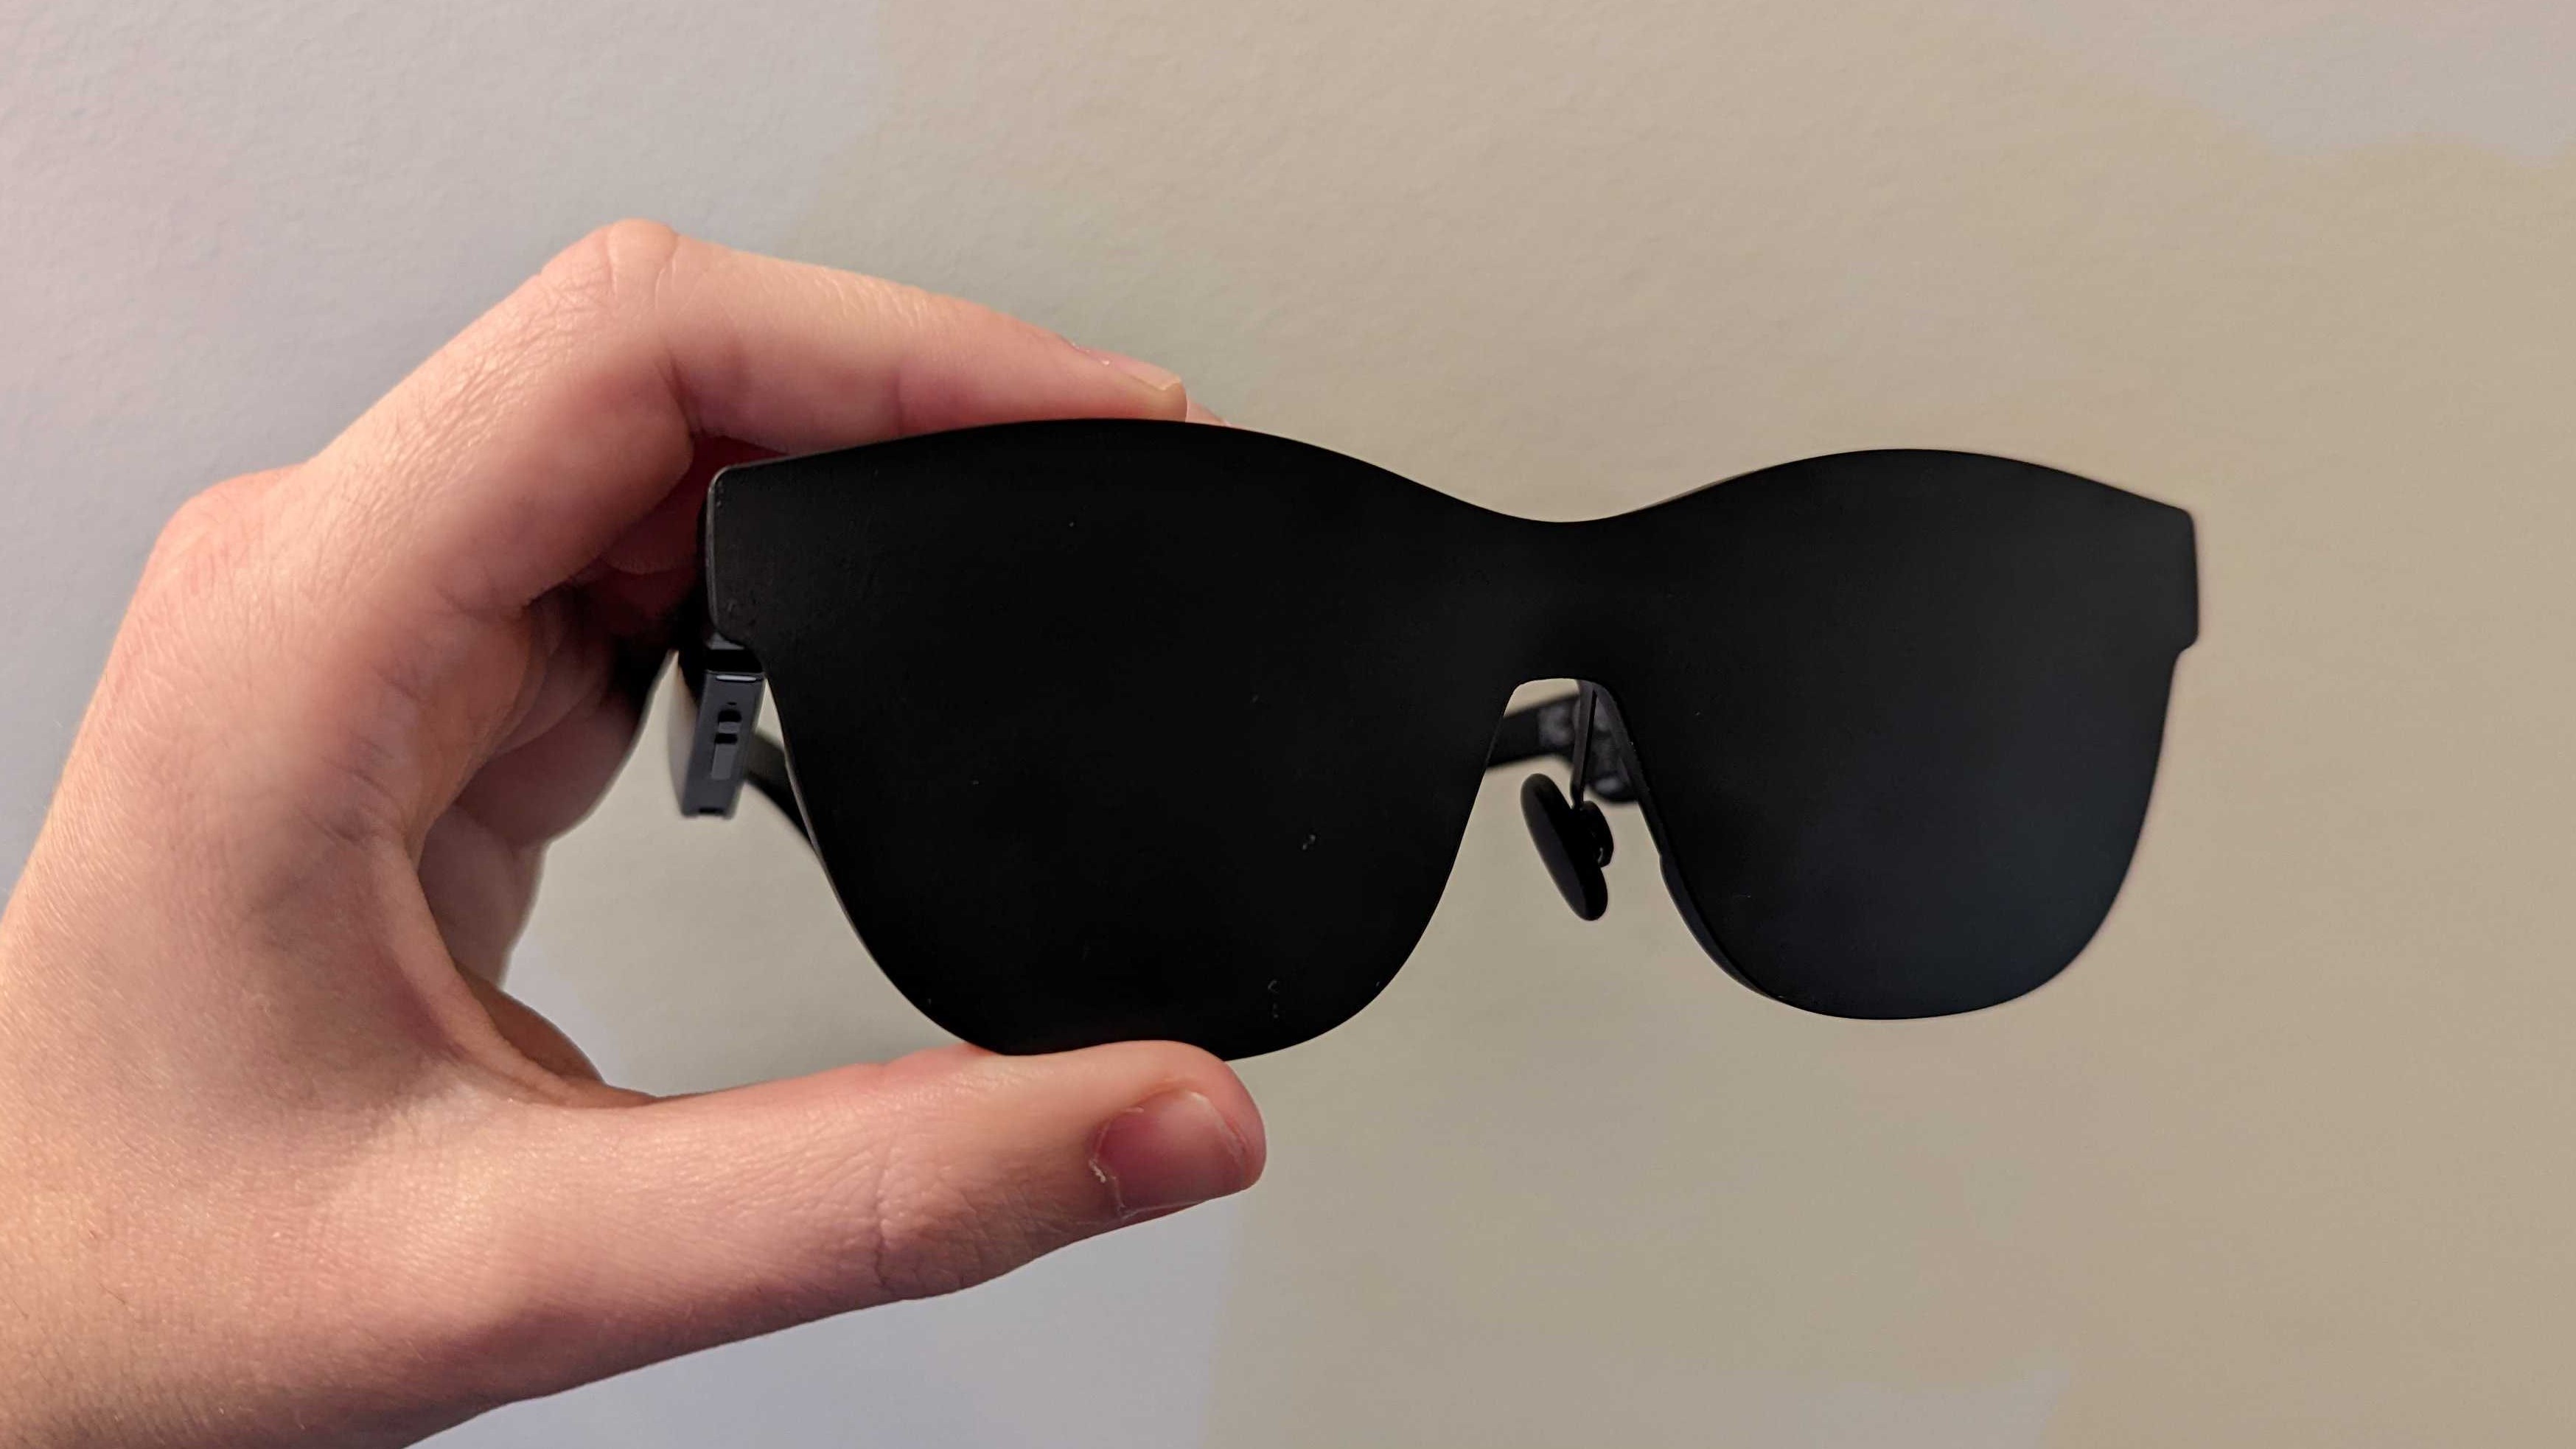 The Xreal Air AR Glasses with the black opaque visor clipped on